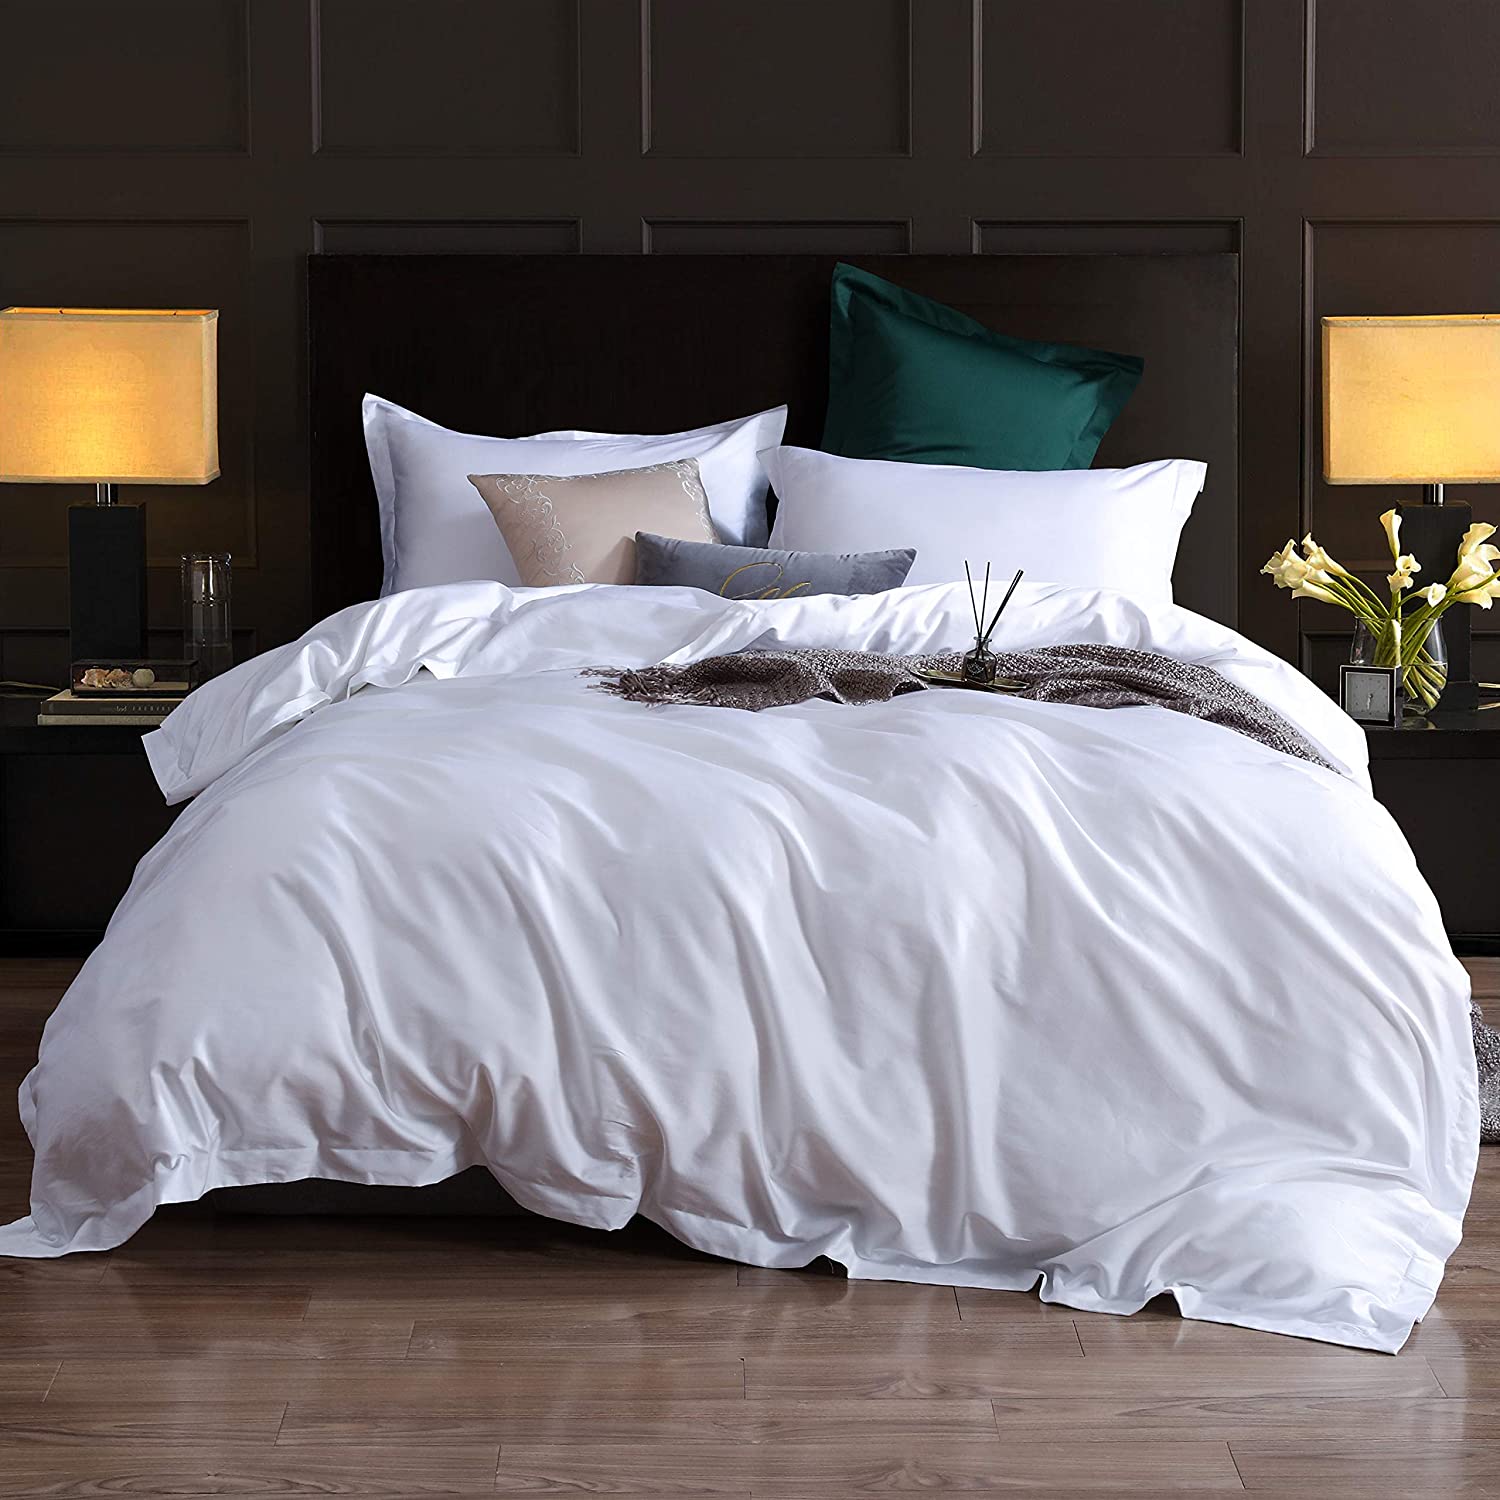 1200 Thread Count Egyptian Cotton Duvet Cover Set | Yedwo Home